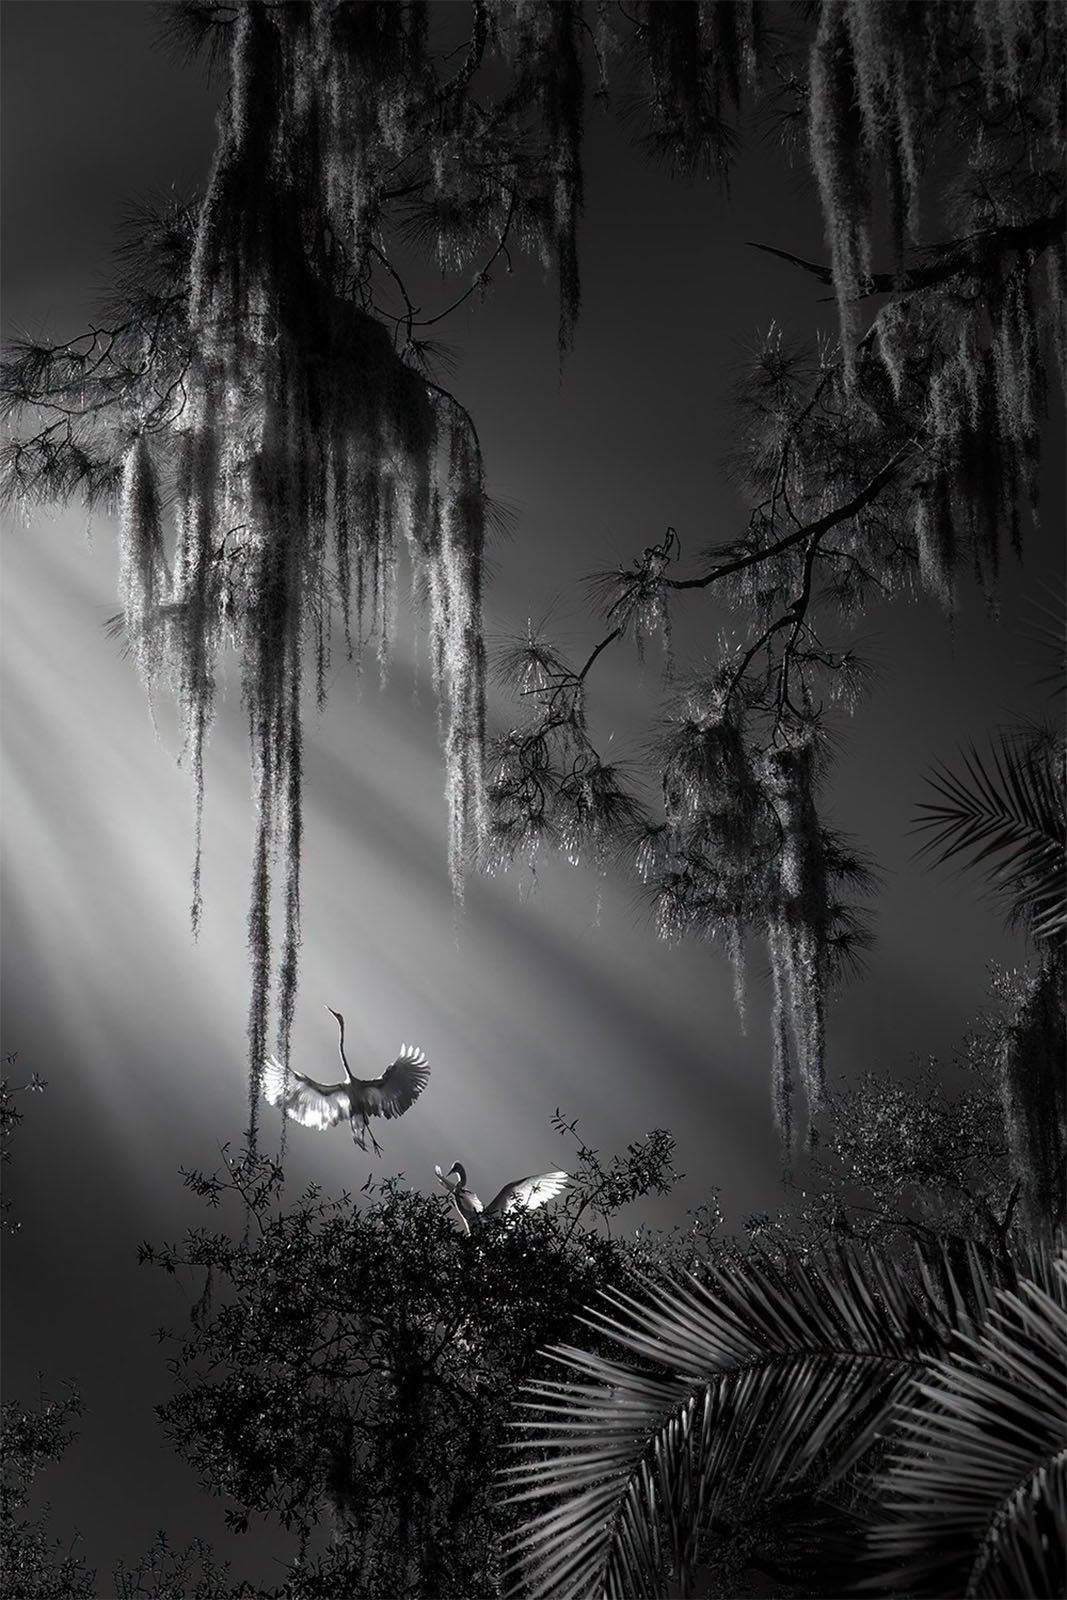 A black-and-white photograph showing two egrets perched on tree branches illuminated by sunlight filtering through hanging moss and dense tree foliage against a dark sky. Sunbeams create dramatic lighting amid the textured canopy and birds.